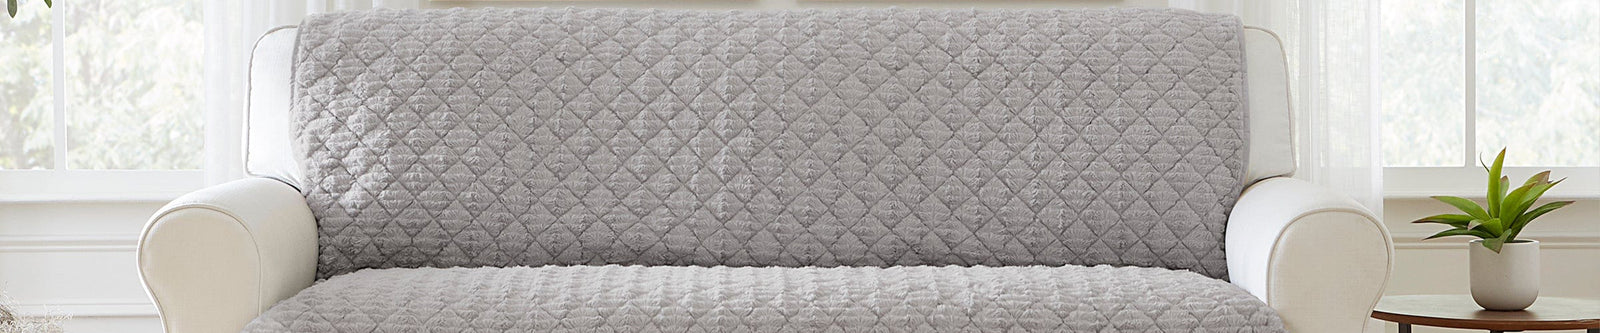 Diamond Quilted Fur